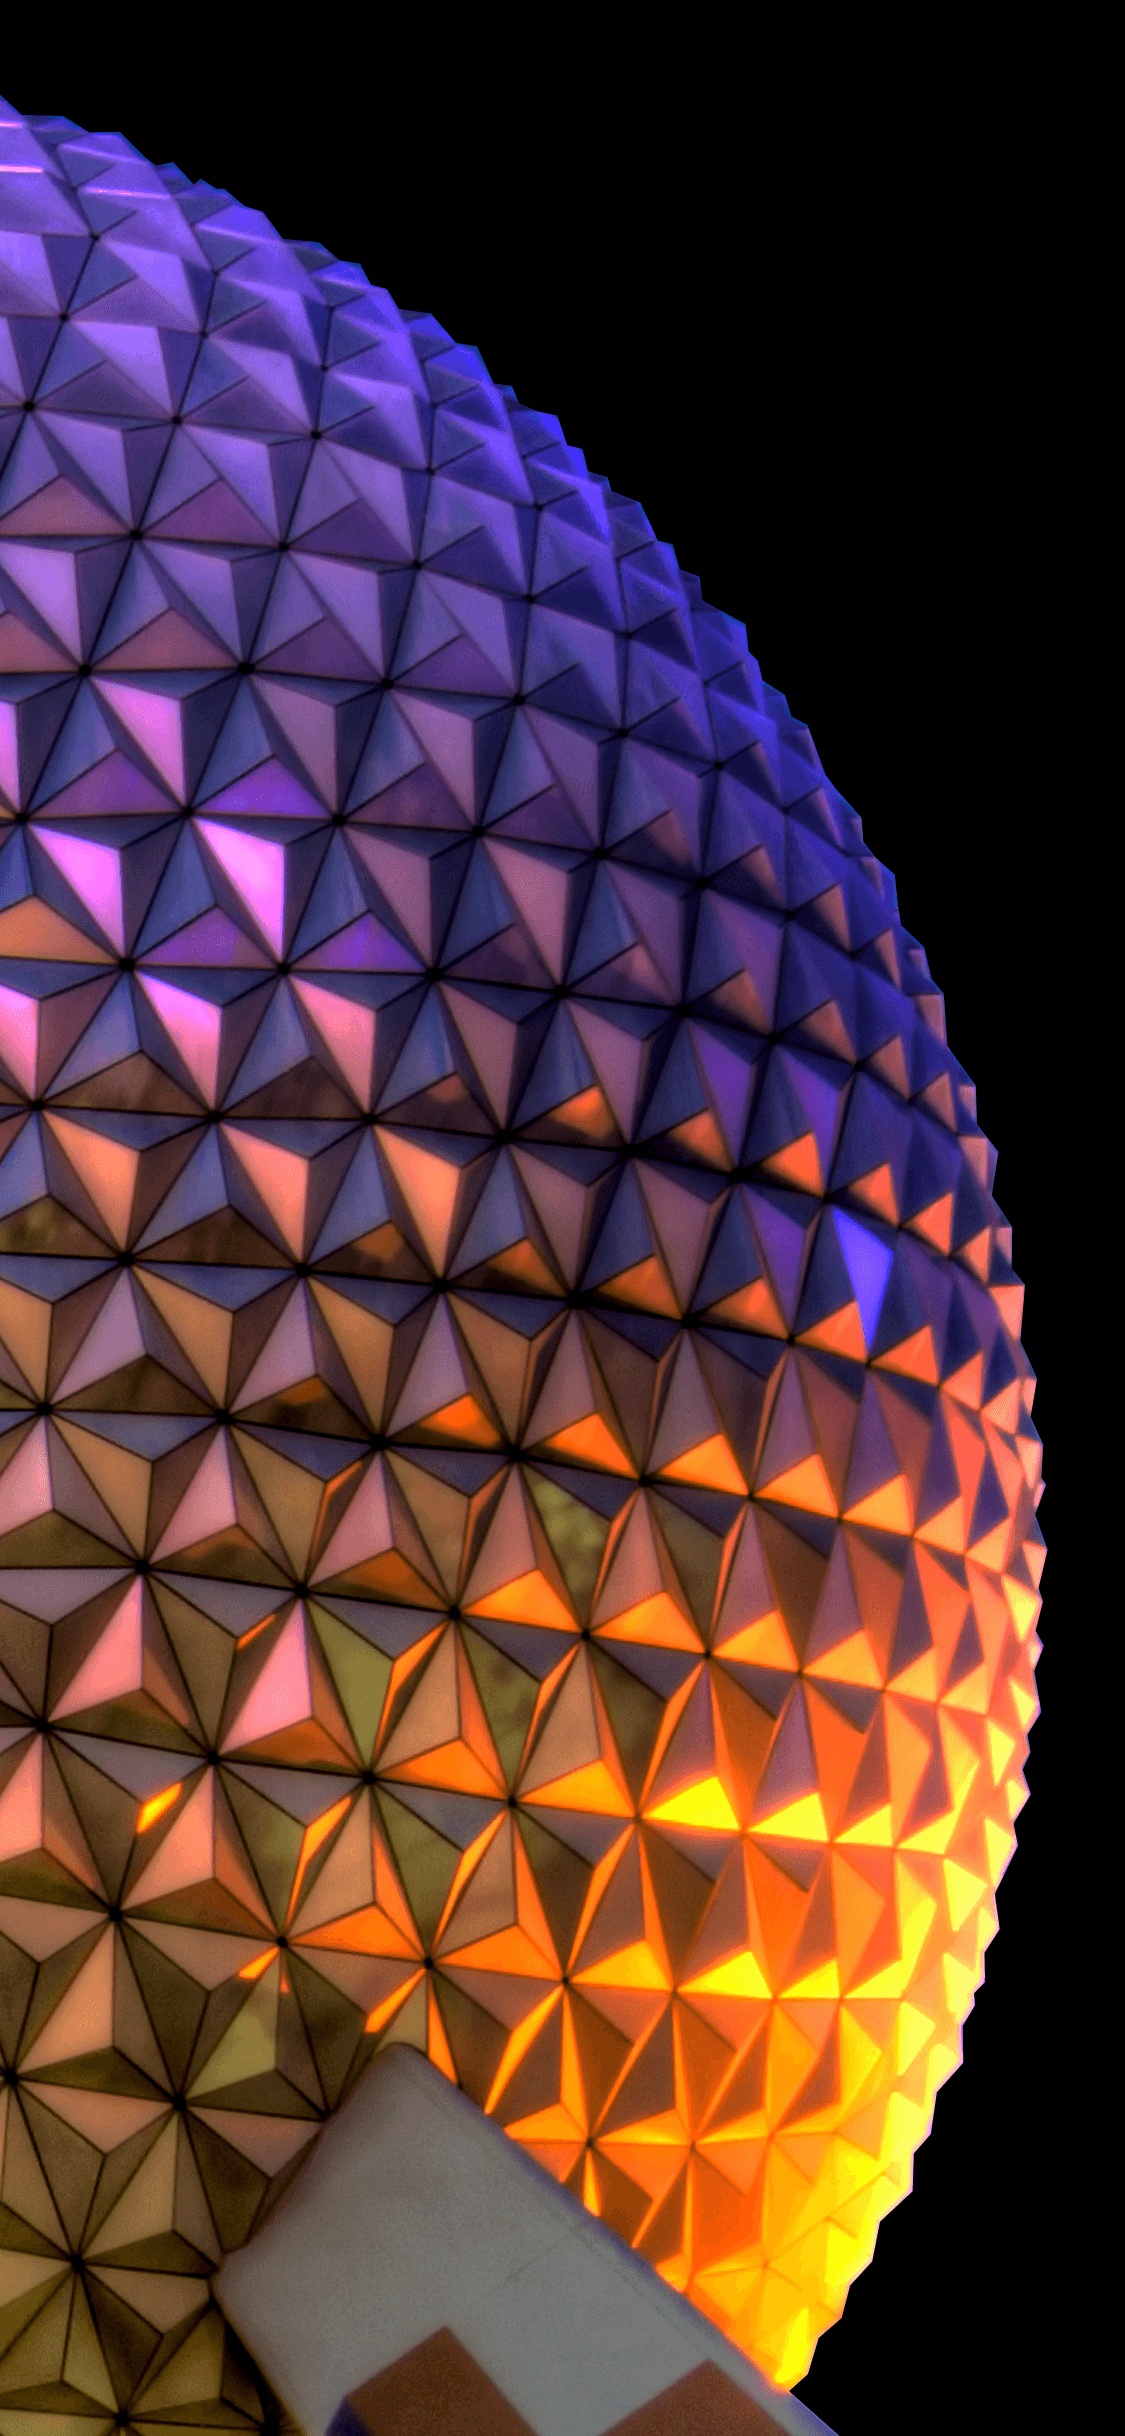 Spaceship Earth. Inspired by new iPhone wallpaper. 1125